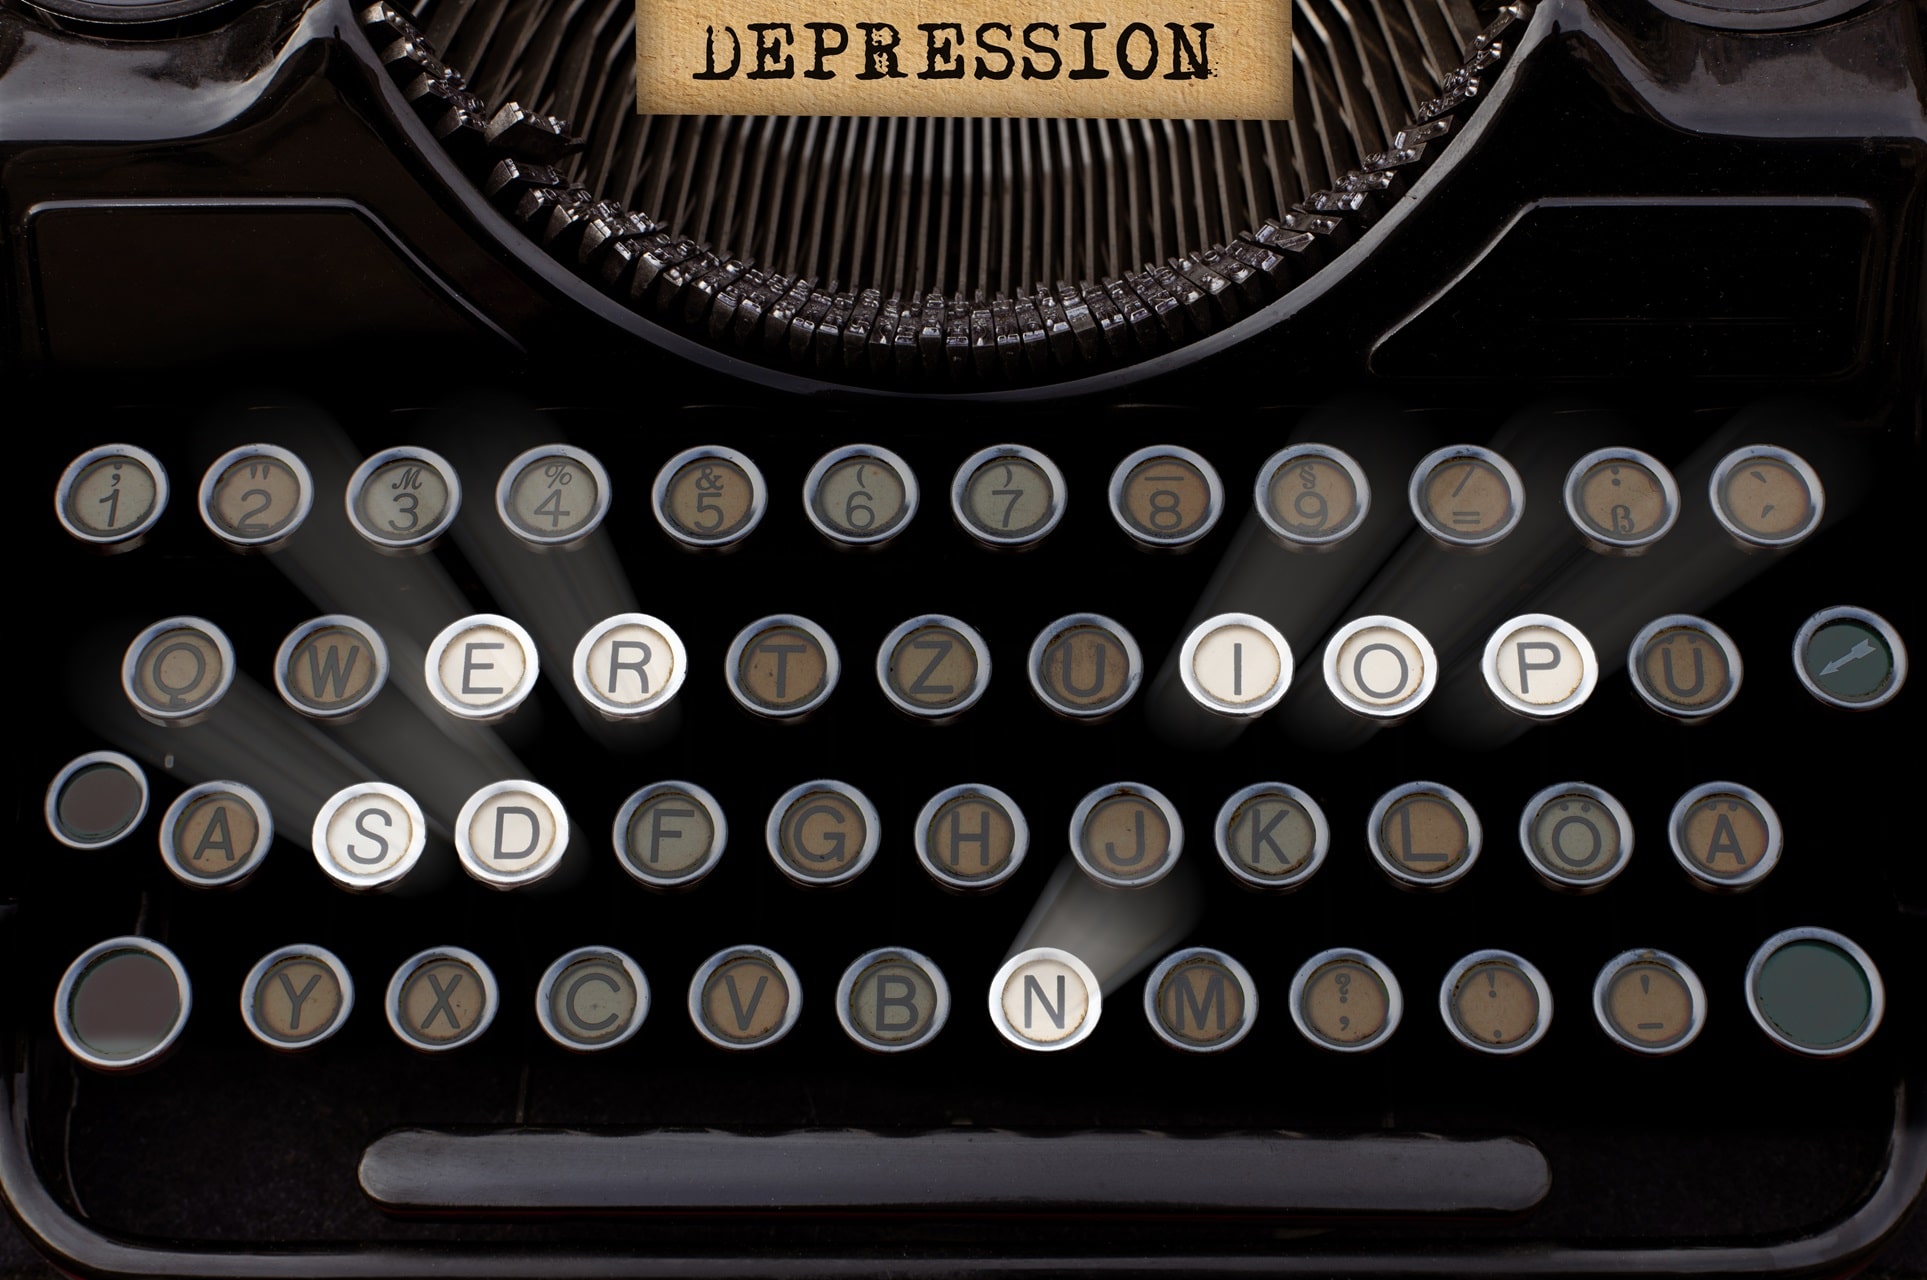 The most effective ways to fight depression